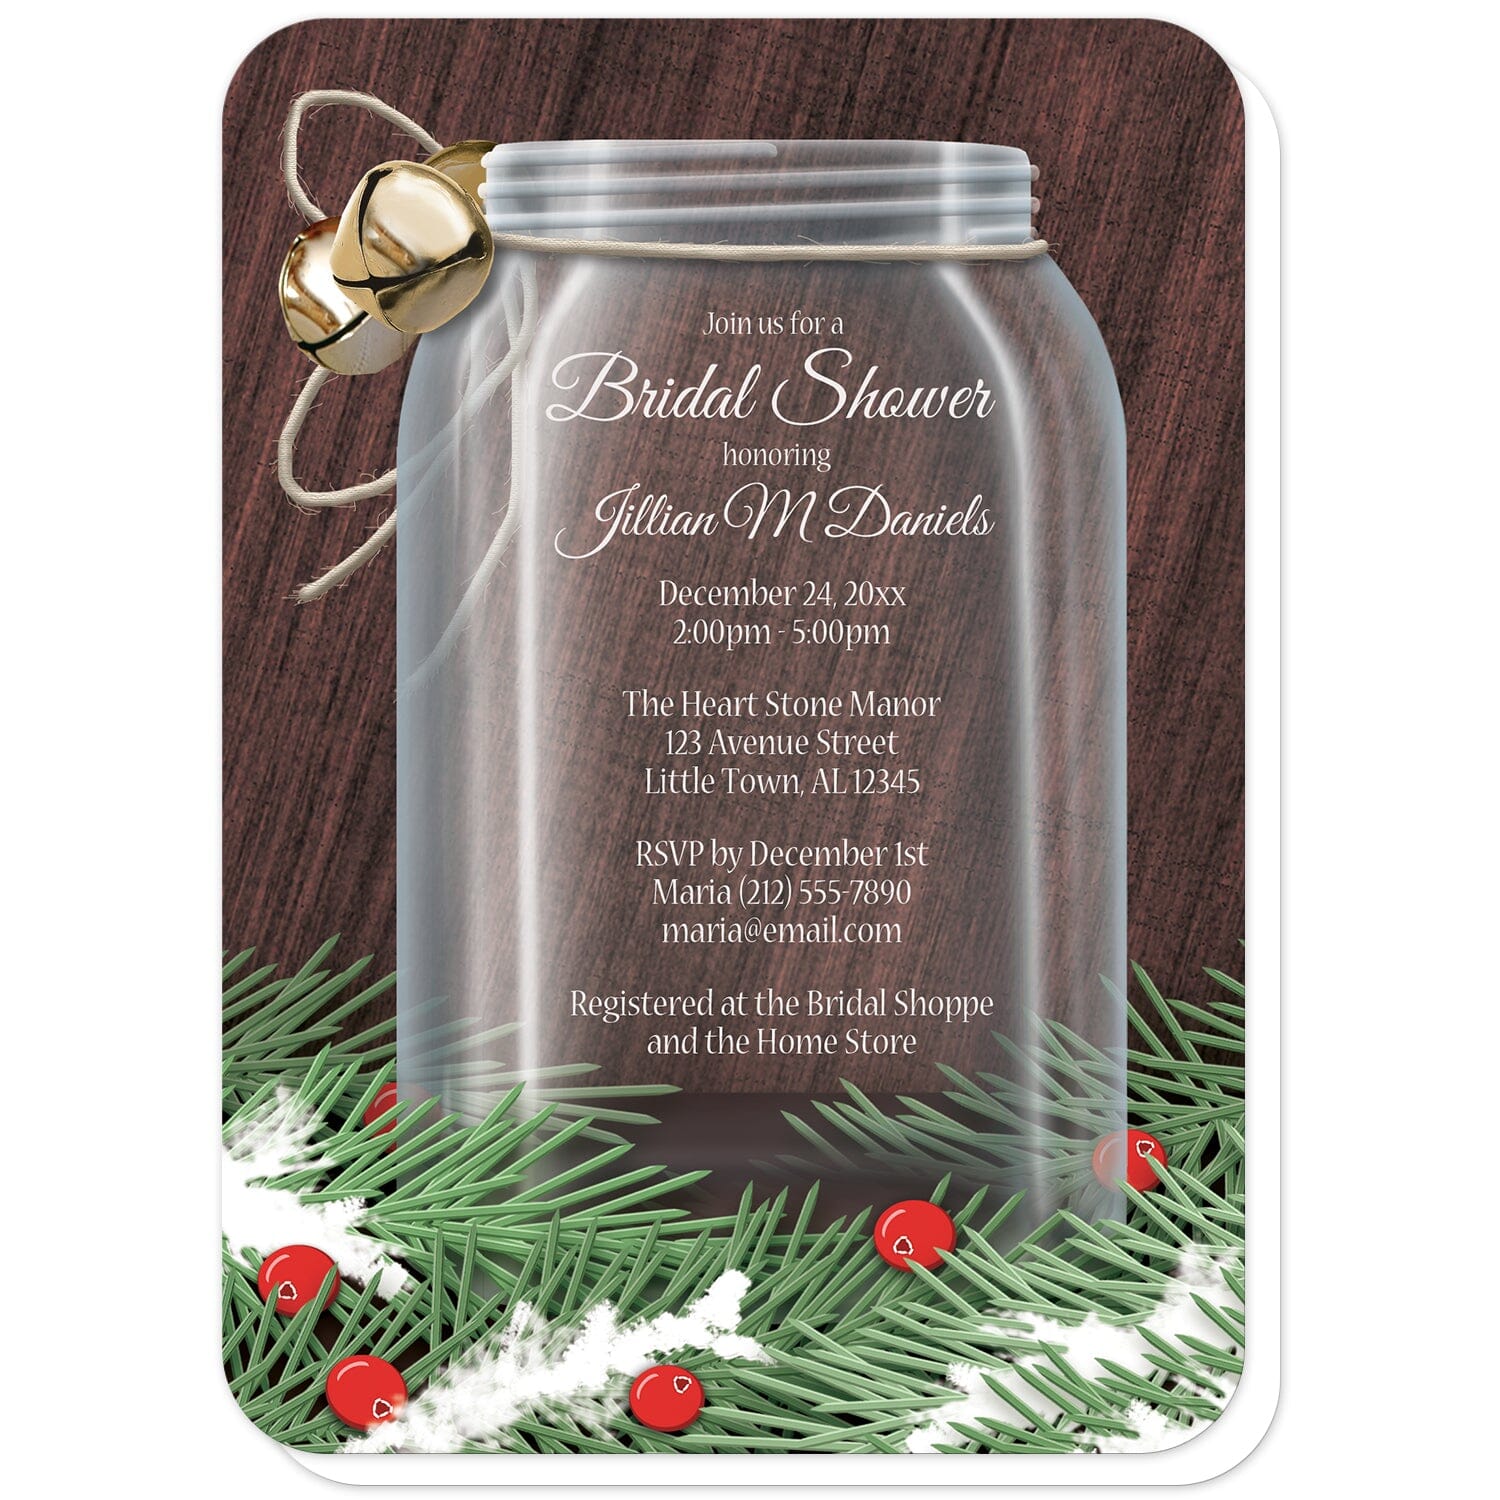 Winter Mason Jar Pine Boughs Bridal Shower Invitations (with rounded corners) at Artistically Invited. Rustic holiday-themed winter mason jar pine boughs bridal shower invitations designed with a glass mason jar illustration with twine and jingle bells tied around the top of the jar and pine boughs and cranberries along the bottom over a dark wood design. Your personalized bridal shower celebration details are custom printed in white over the mason jar area of the design.